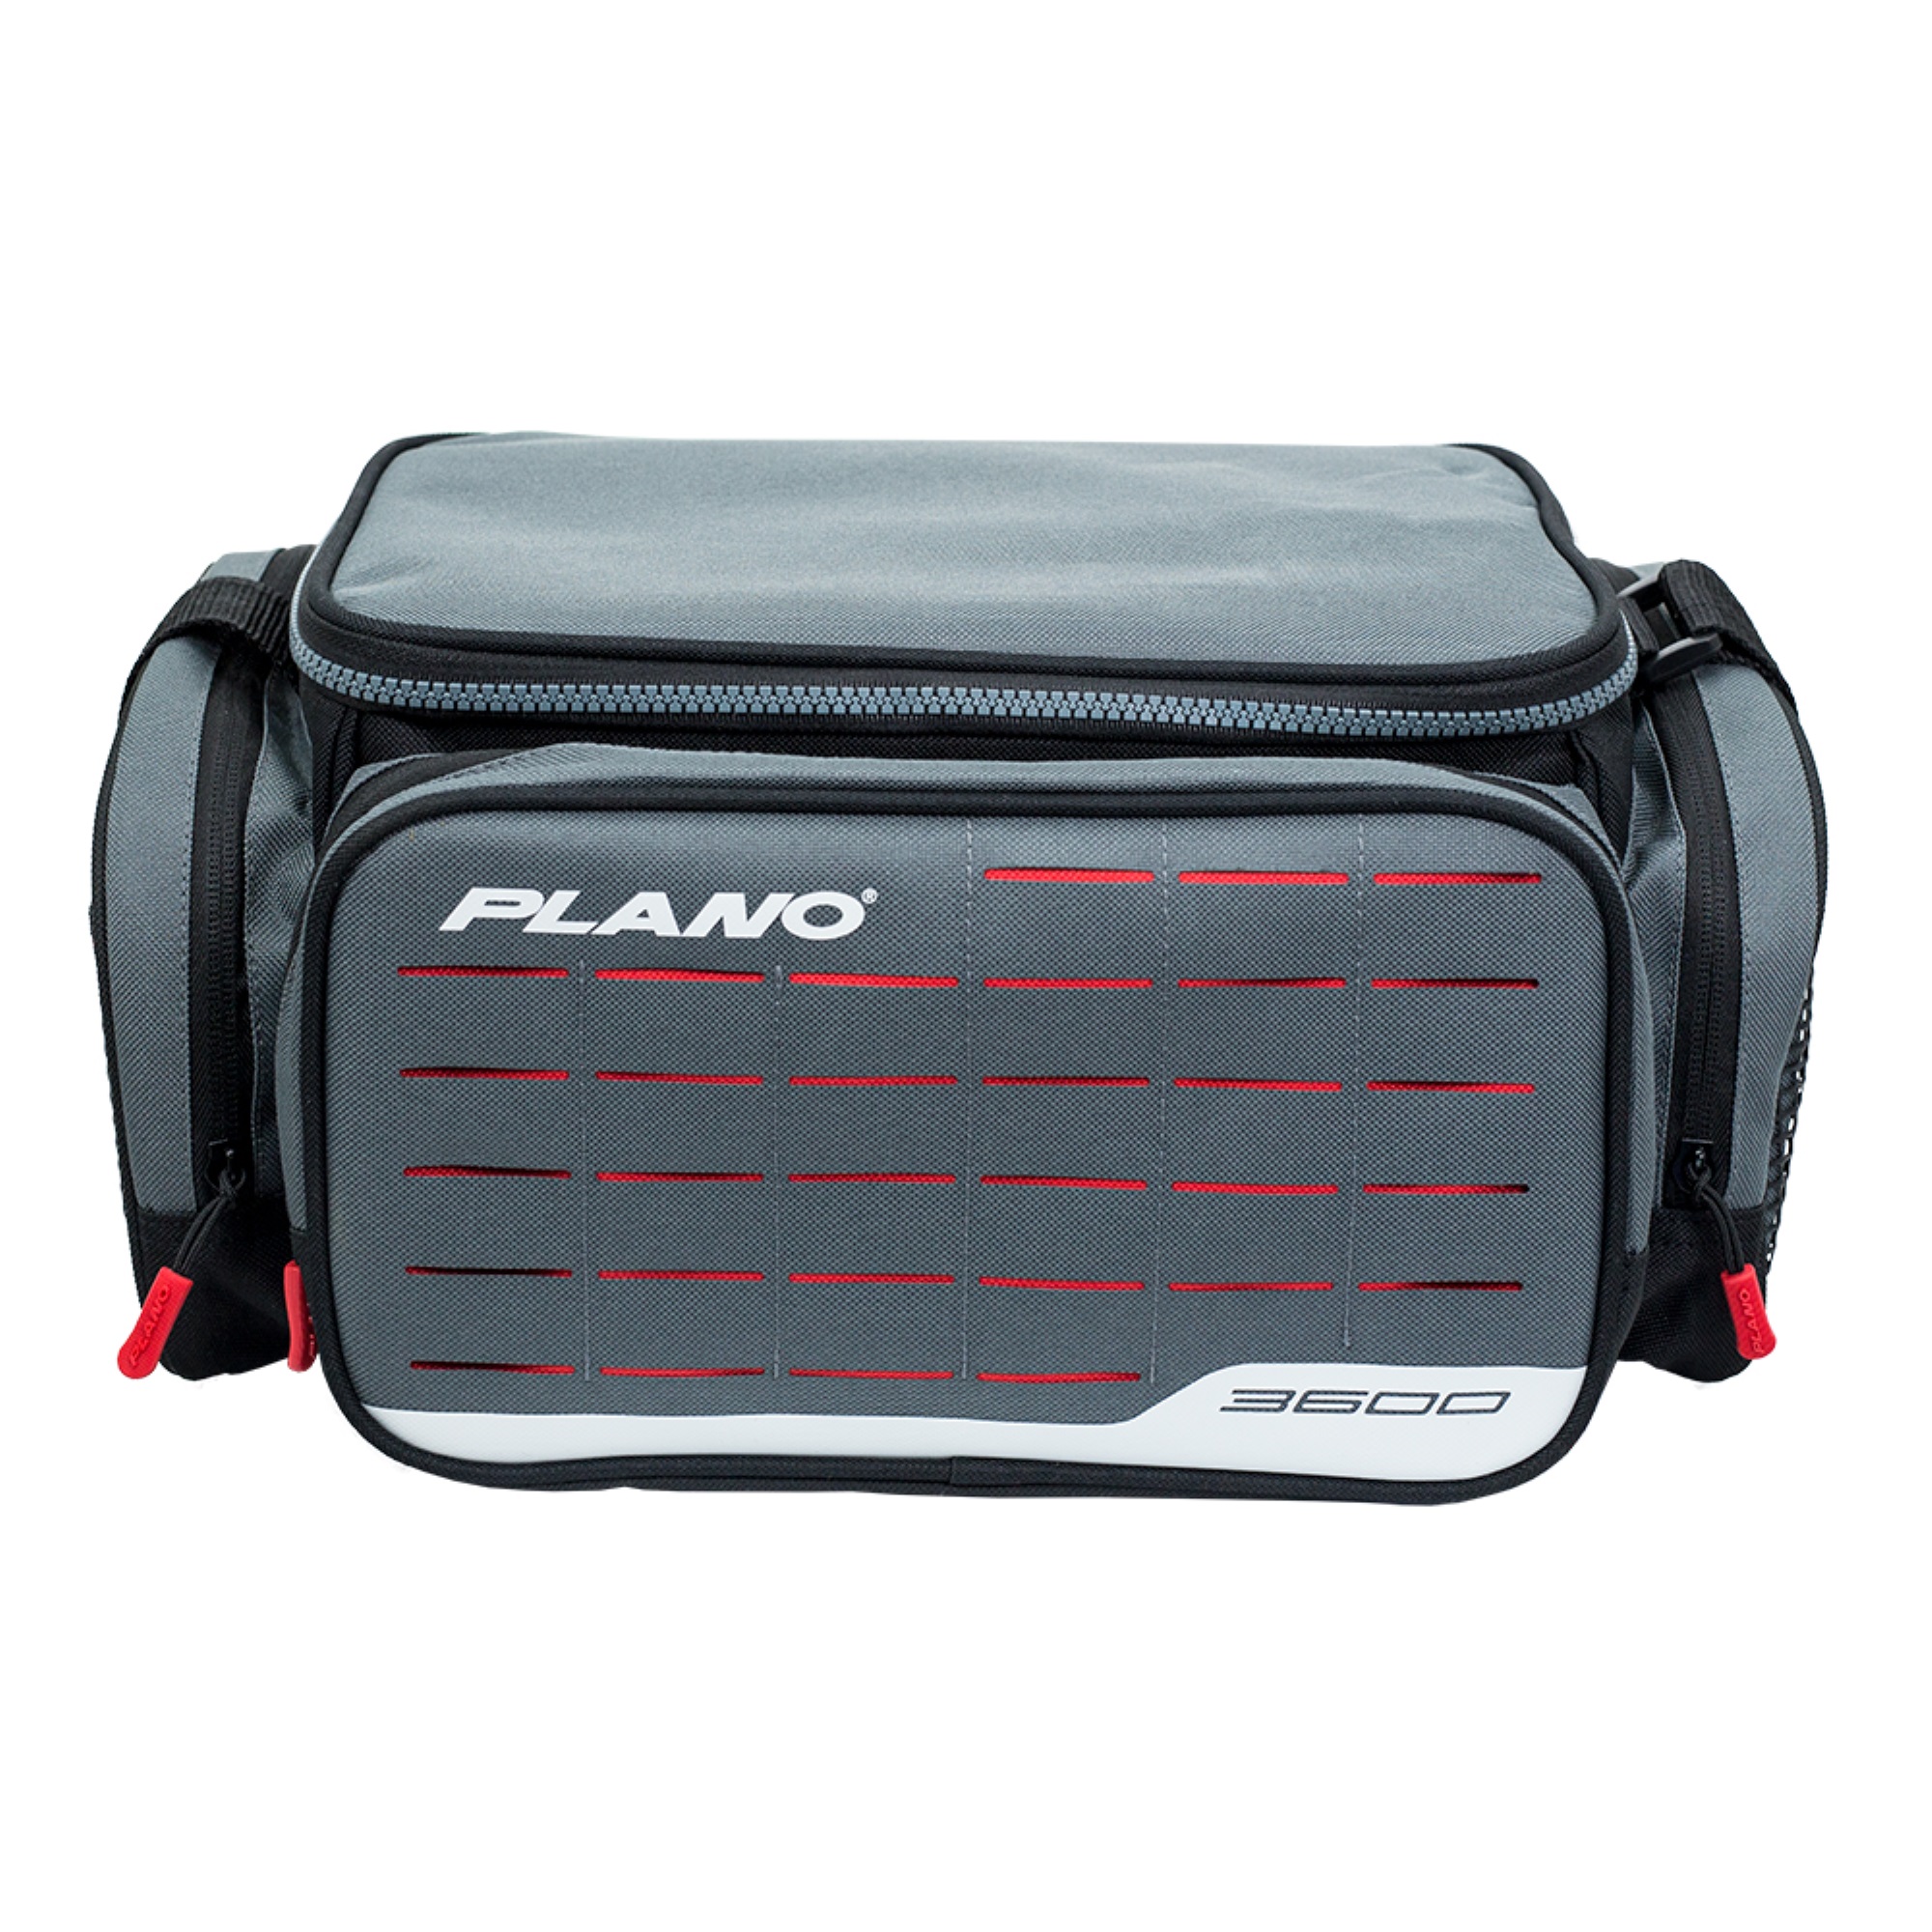 Plano Weekend Series 3600 Tackle Case, Includes 2 StowAway Boxes - image 2 of 2